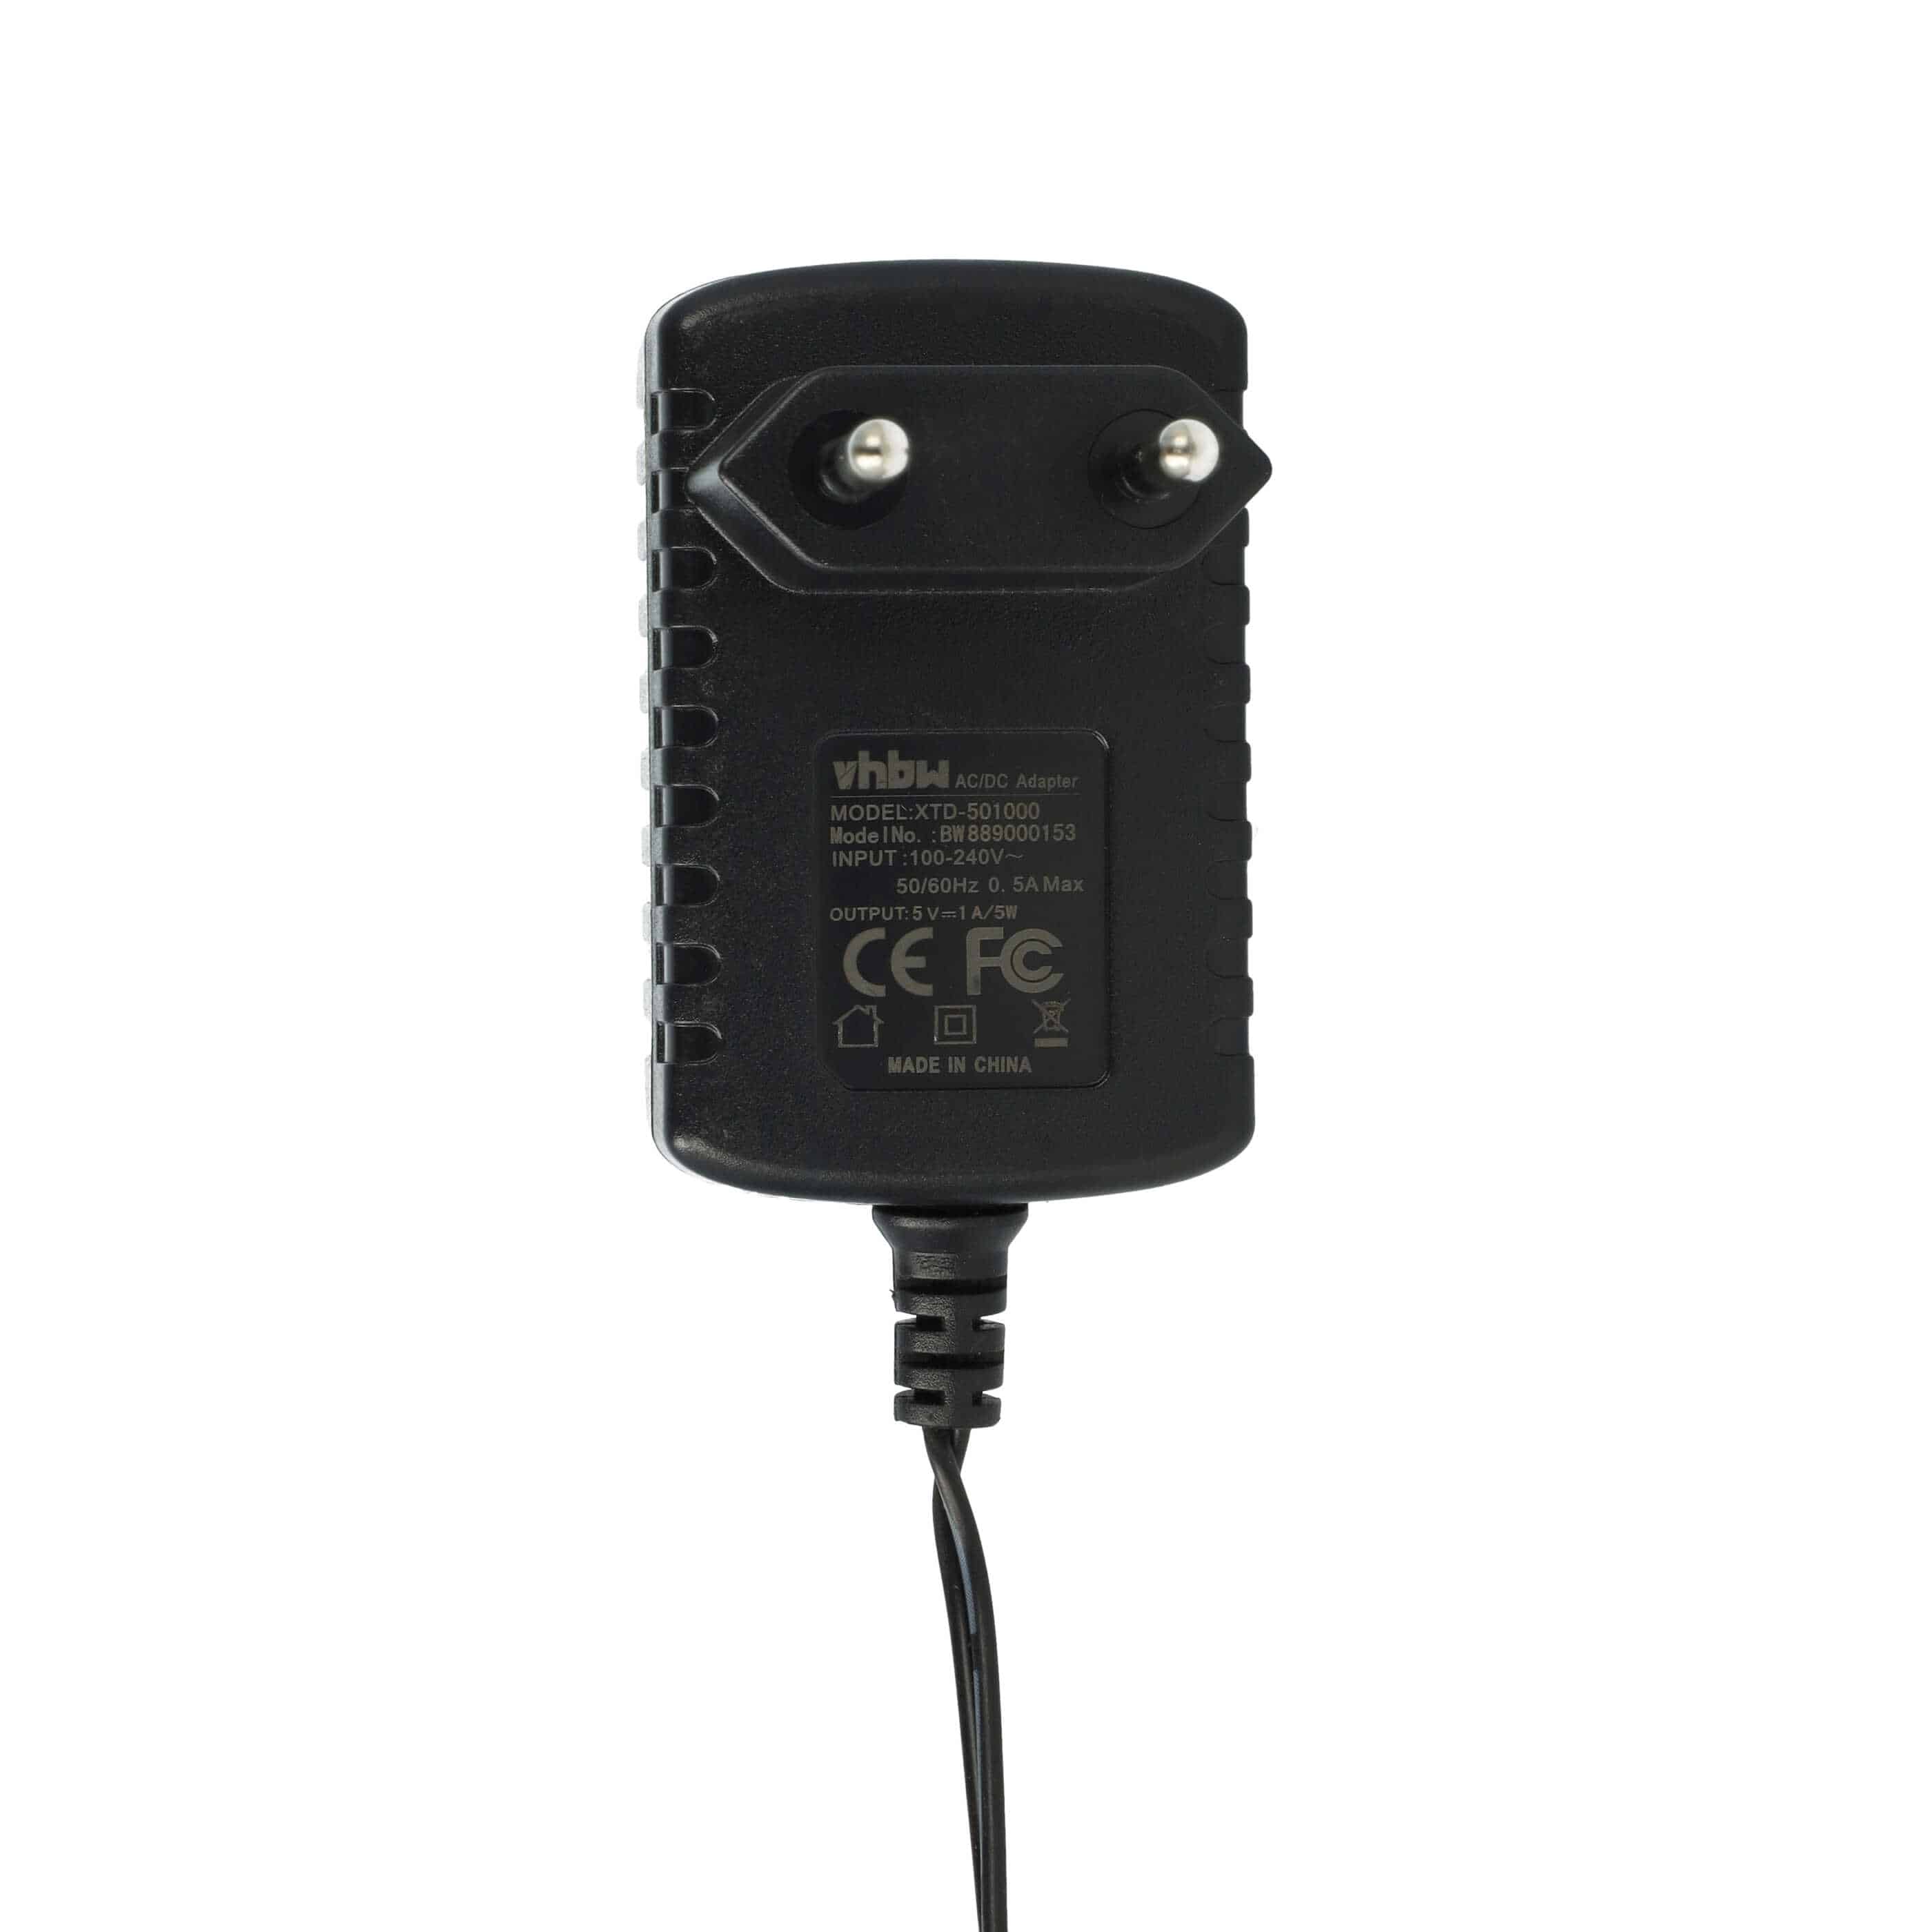 Mains Power Adapter replaces Gigaset C39280-Z4-C762 for Landline Telephone Charging Station - 150 cm